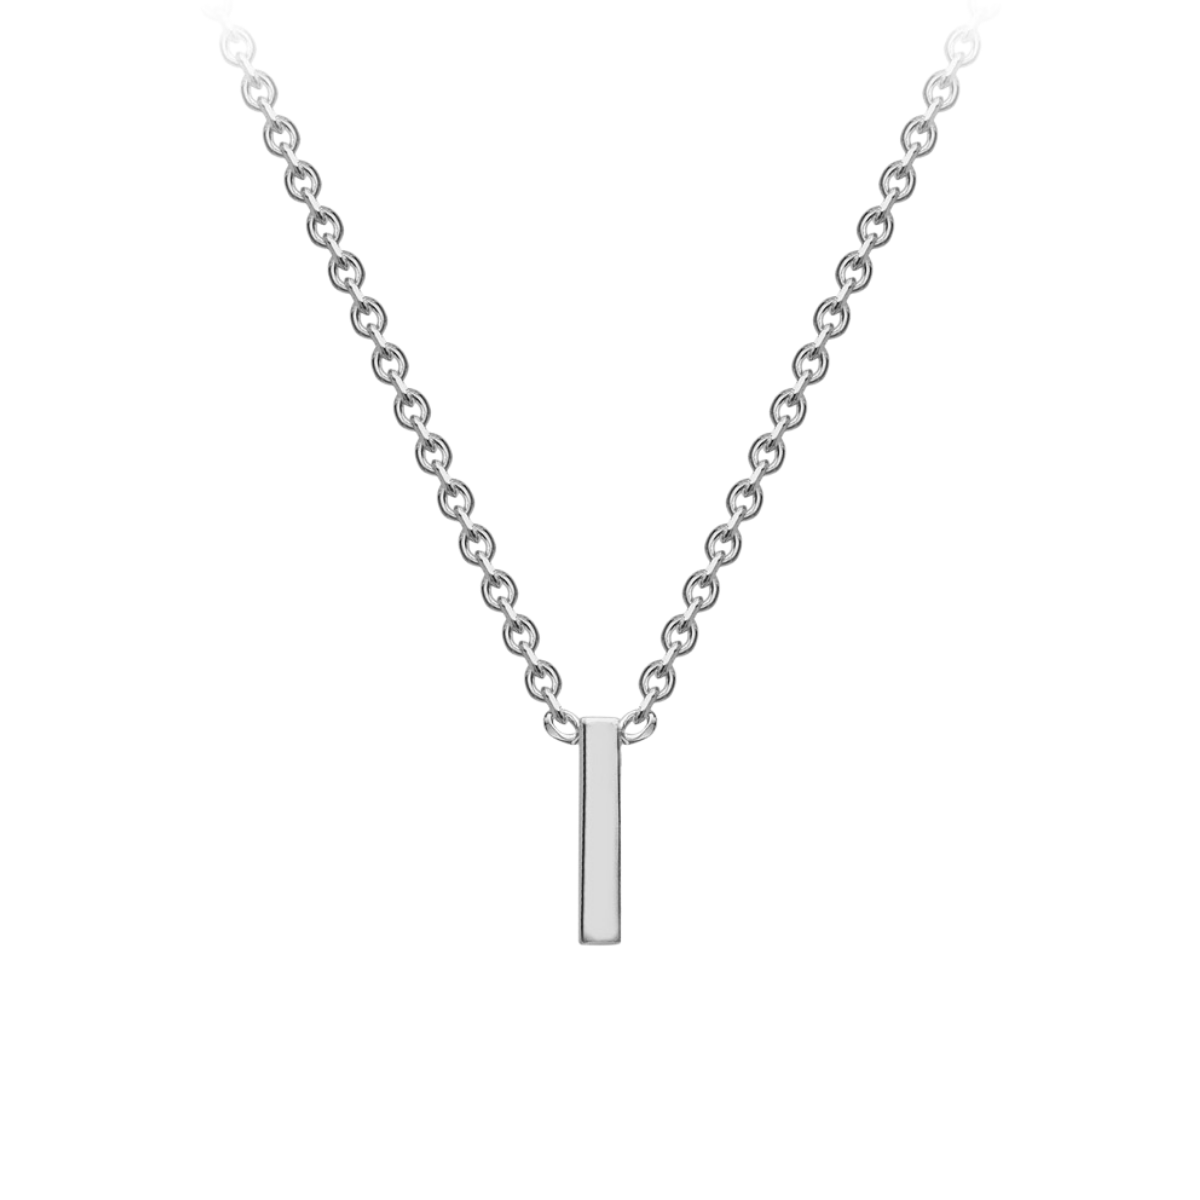 PETITE 'I' INITIAL NECKLACE | 9K SOLID WHITE GOLD